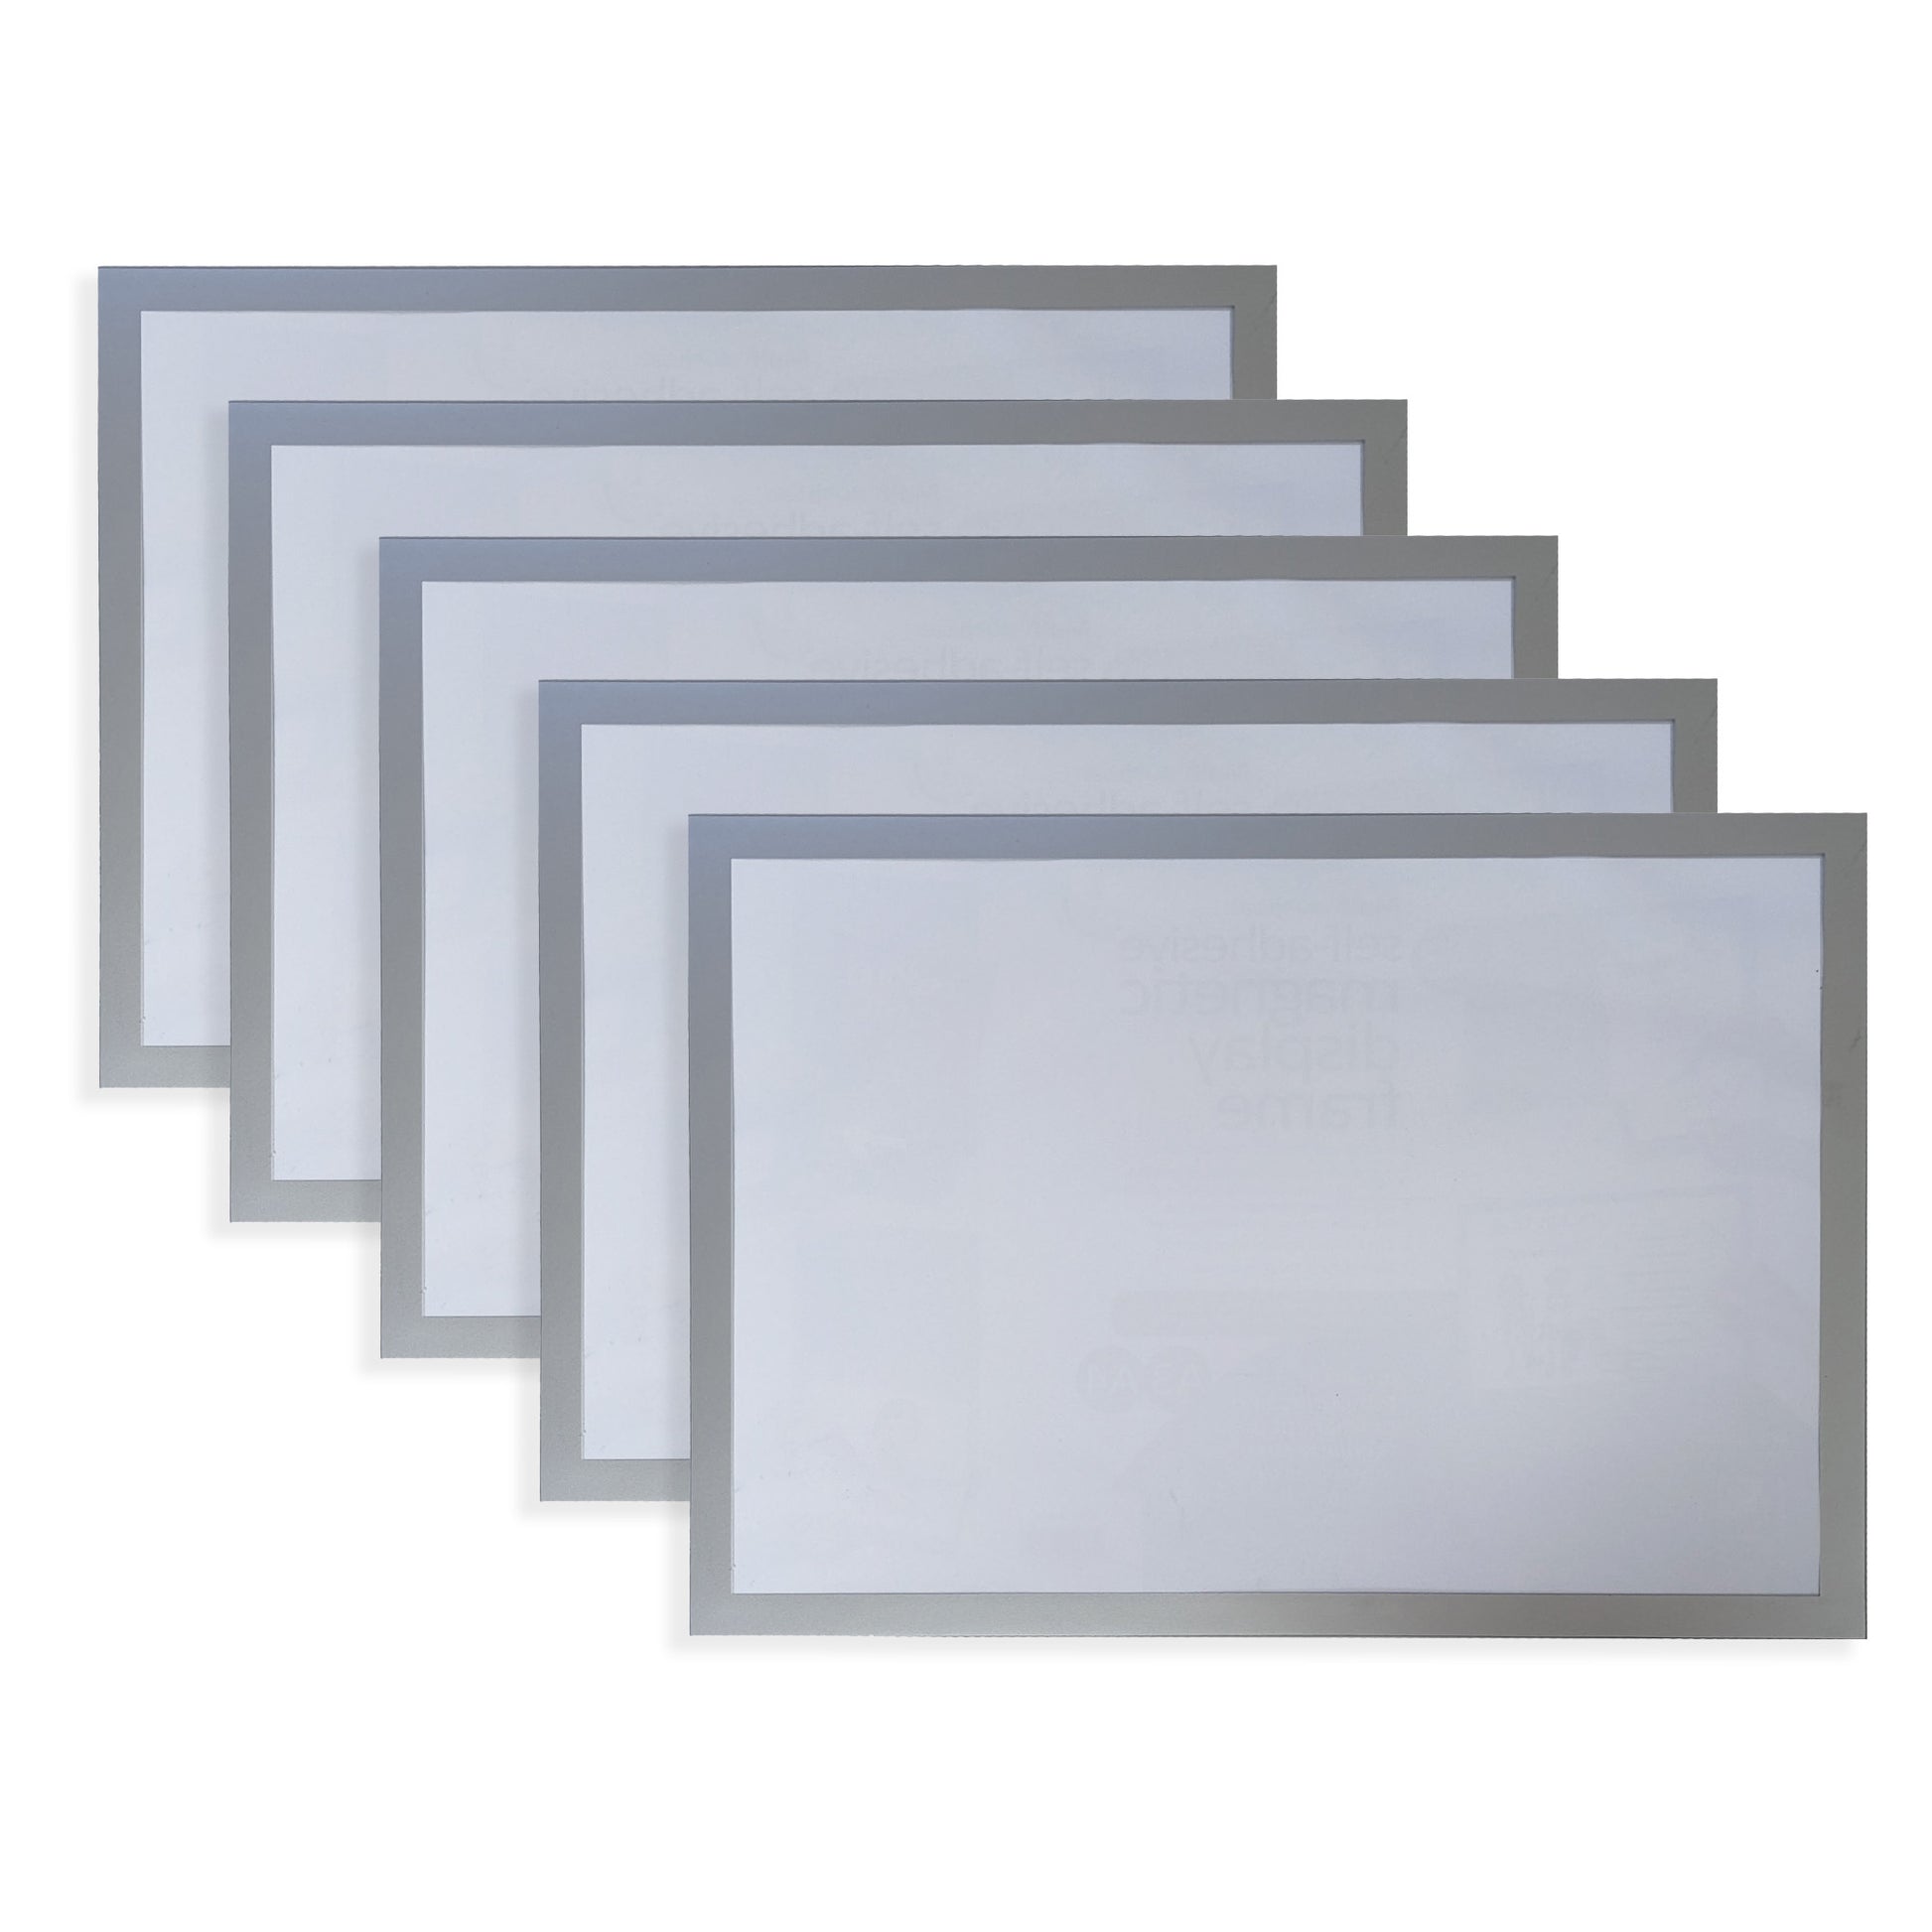 A stack of five A3 self-adhesive magnetic display frames with translucent center and silver borders, displayed in a fan arrangement to show the multiple units included in the package.